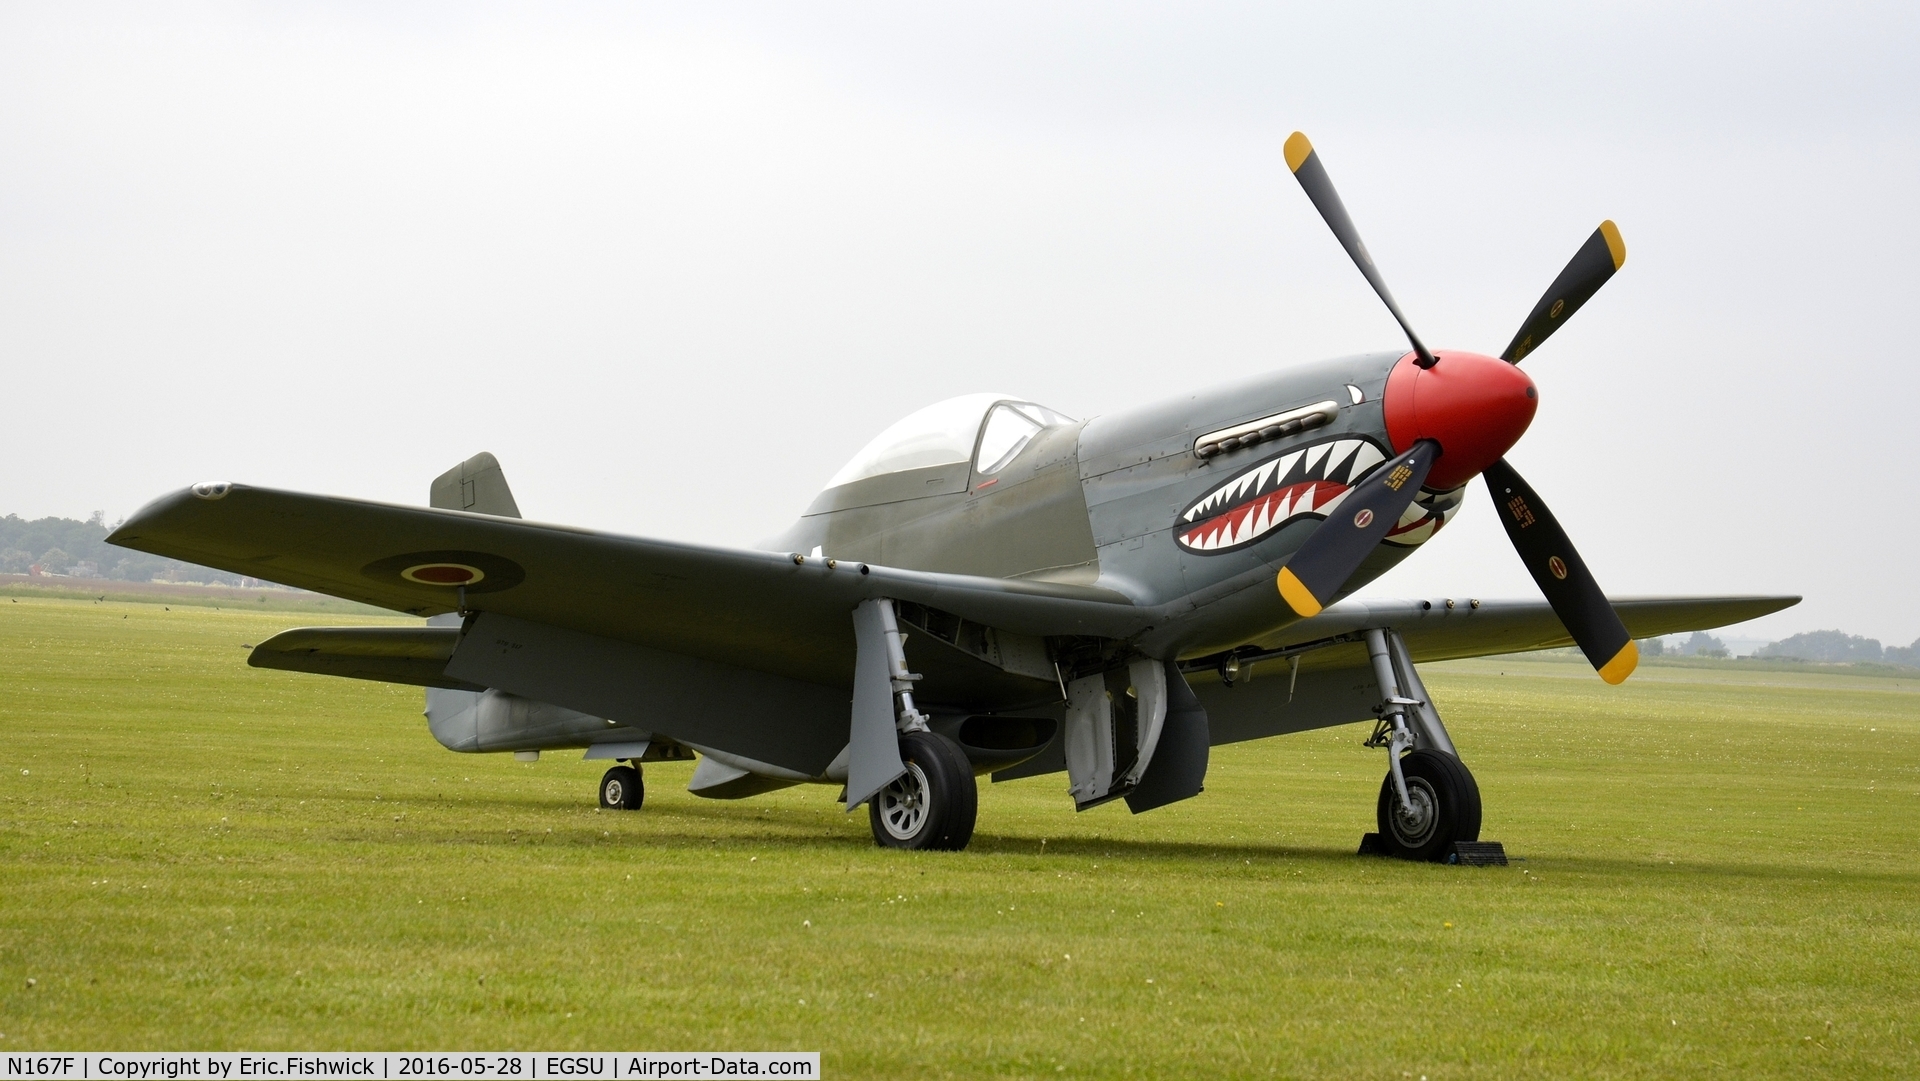 N167F, 1944 North American P-51D Mustang C/N 122-40417, 3. N167F  (Norwegian Spitfire Foundation)  at the IWM American Airshow, May 2016.